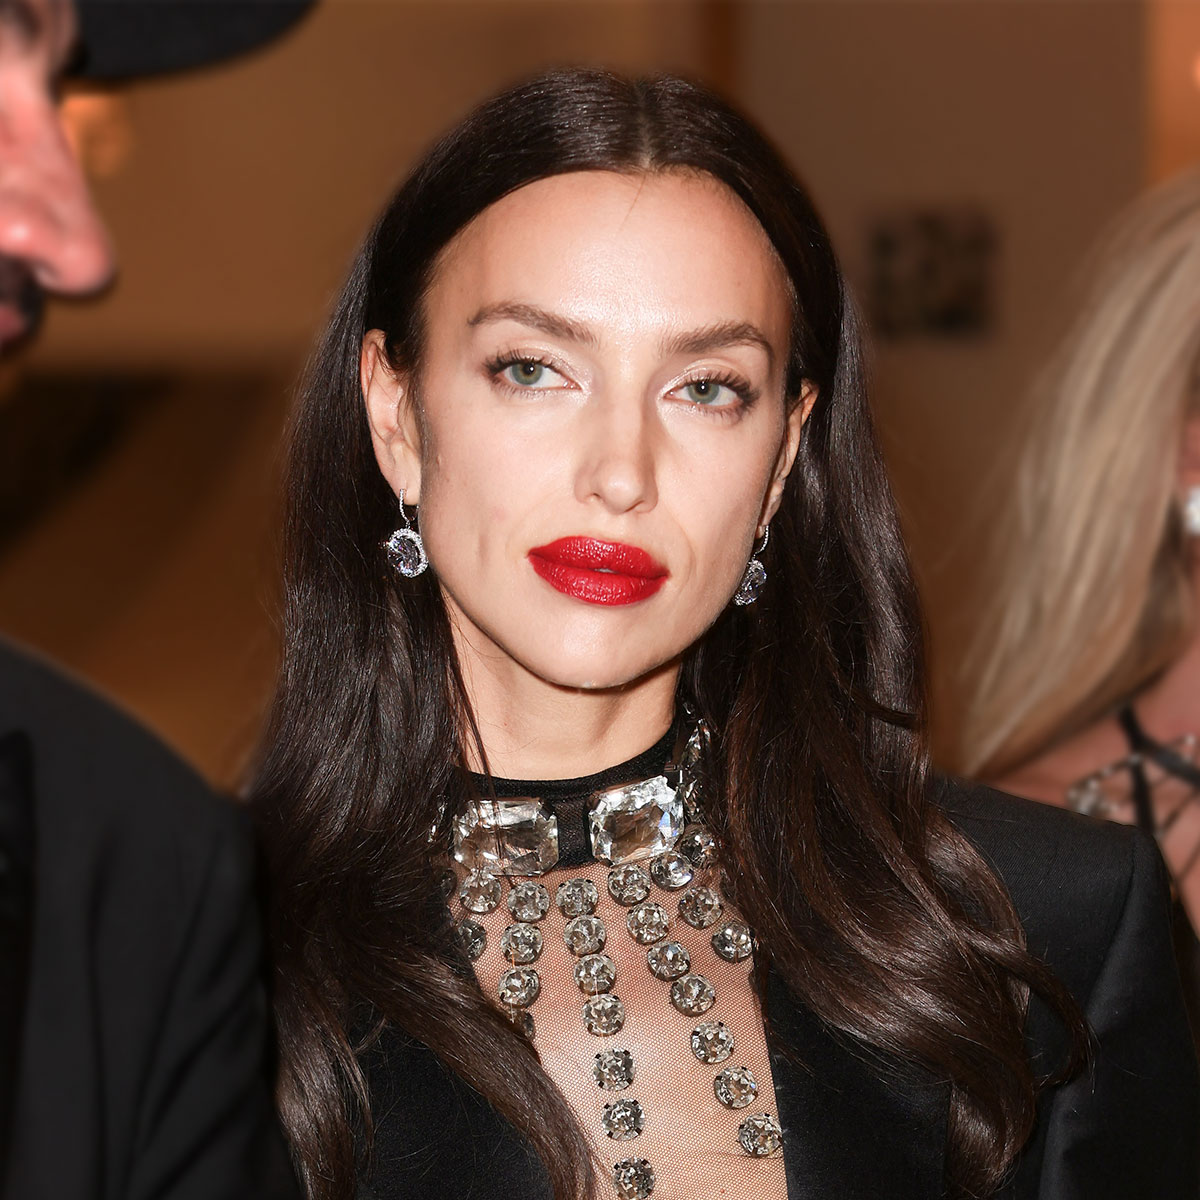 Irina Shayk takes the lingerie trend to a new extreme in completely  see-through dress